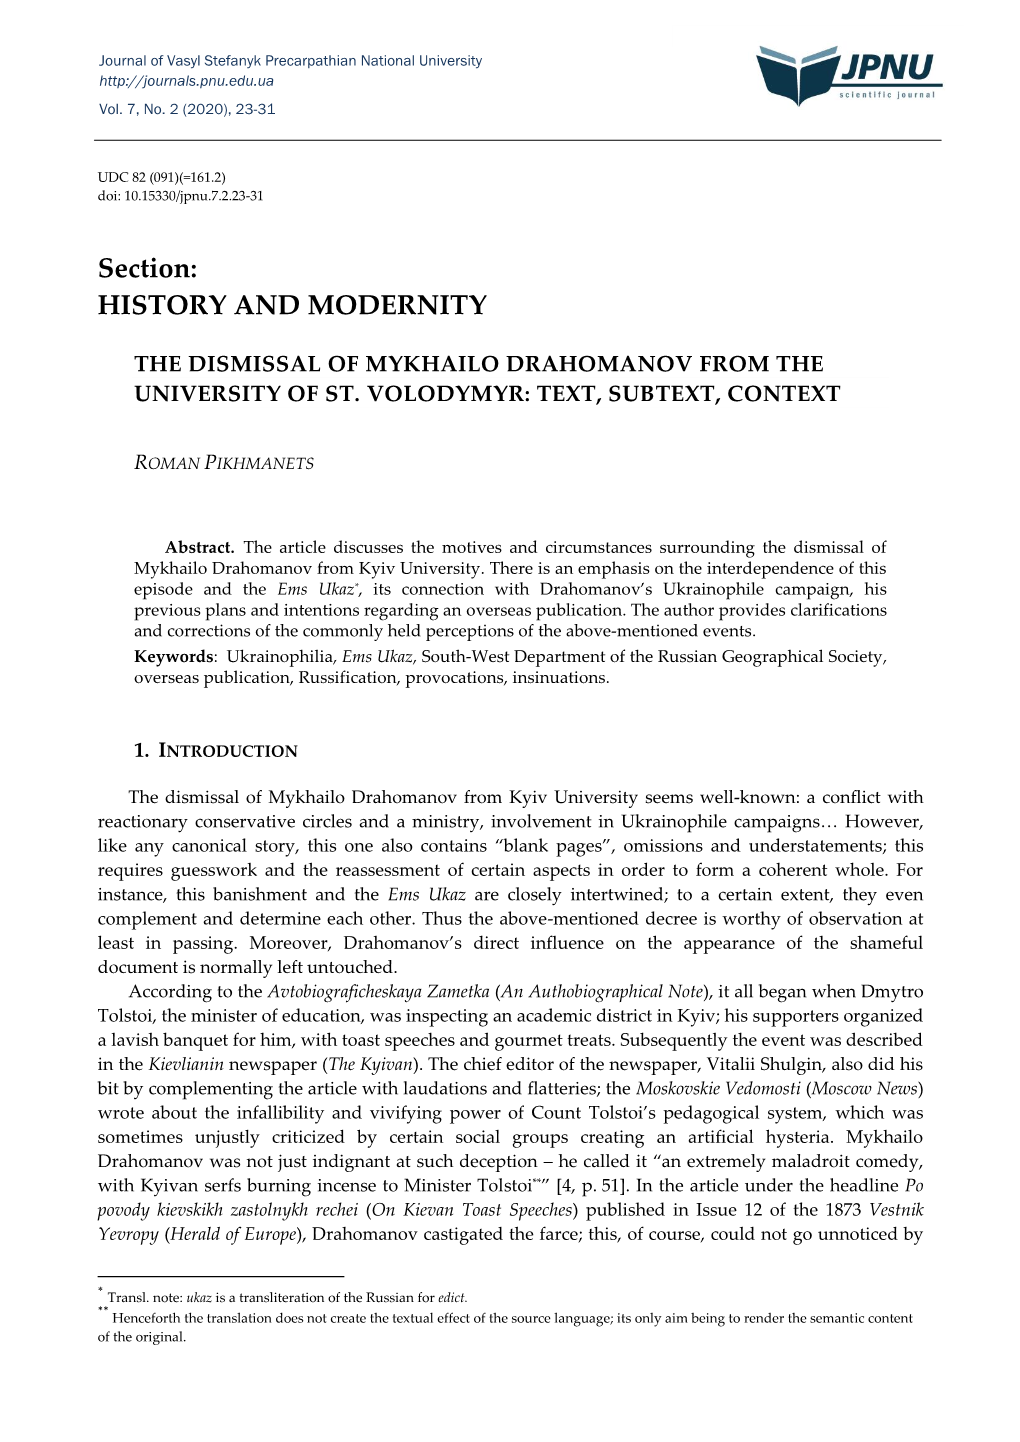 Section: HISTORY and MODERNITY